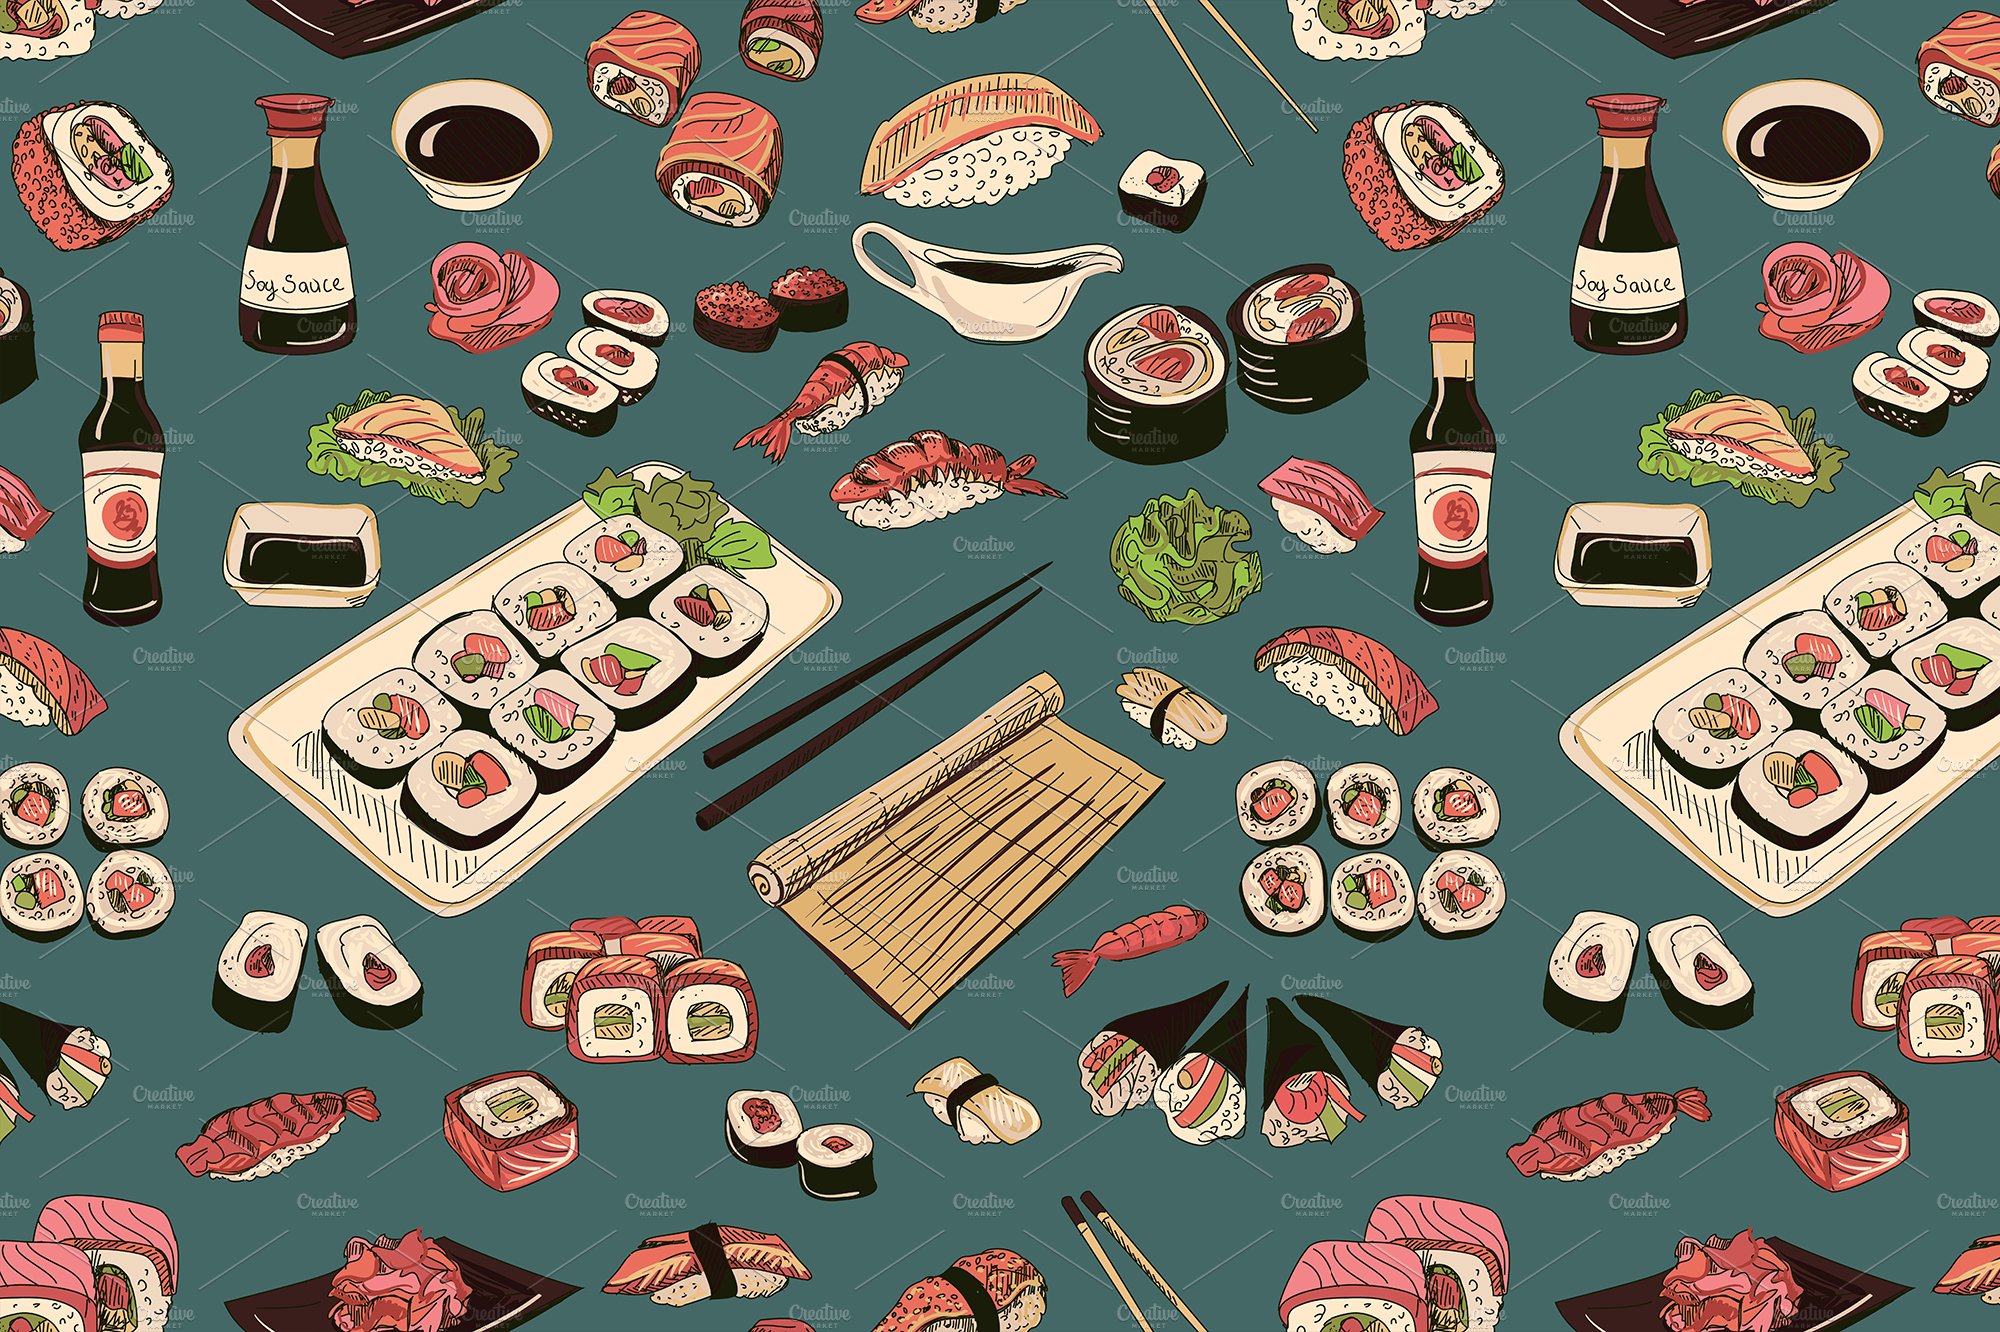 Colored Sushi and rolls pattern cover image.